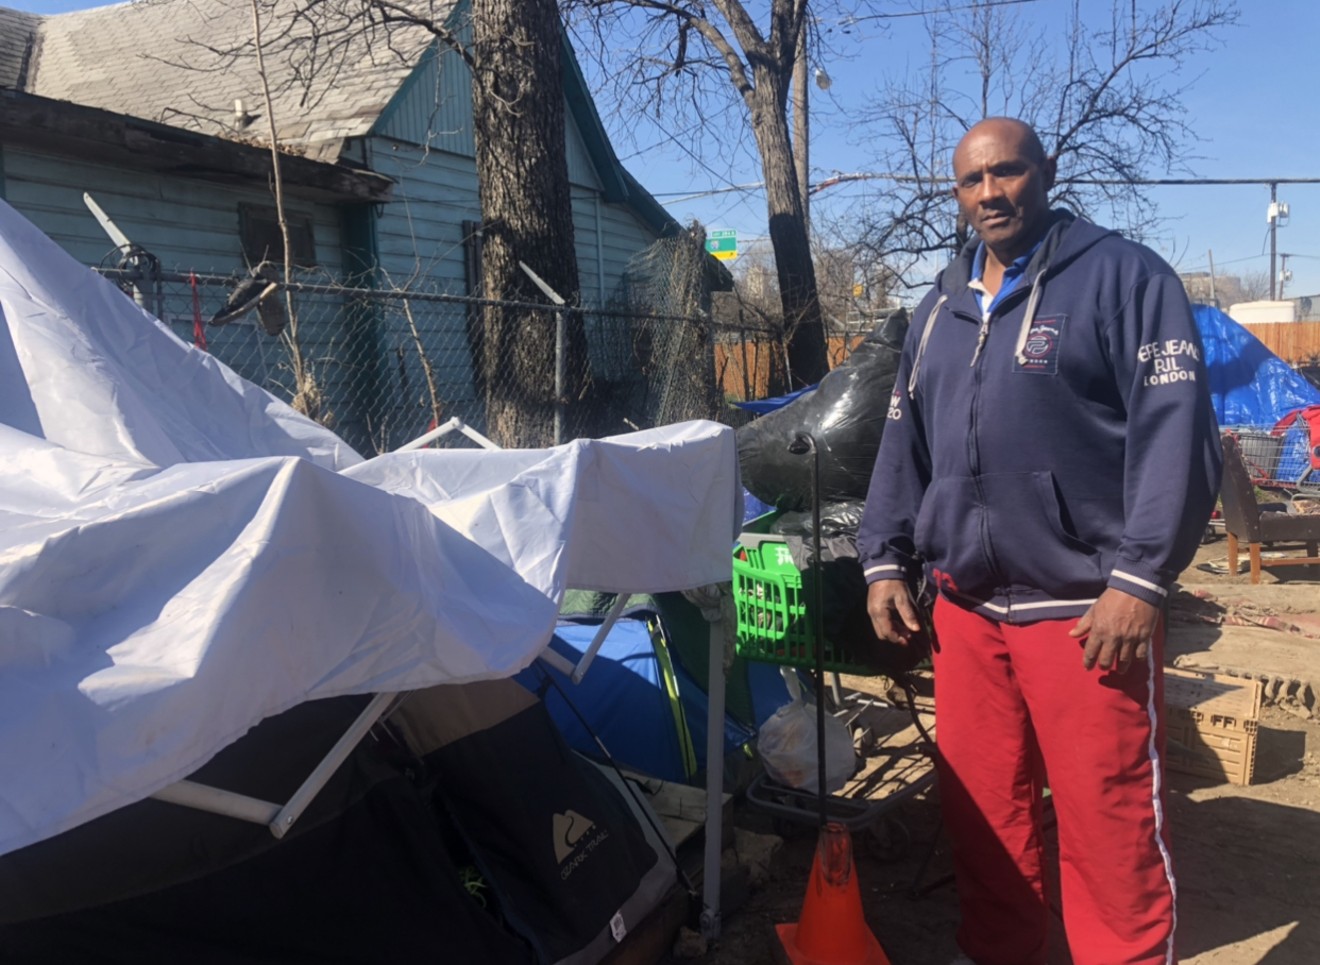 Kevin Stuart, a homeless veteran, stands near his tent at a Dallas homeless encampment in 2021.